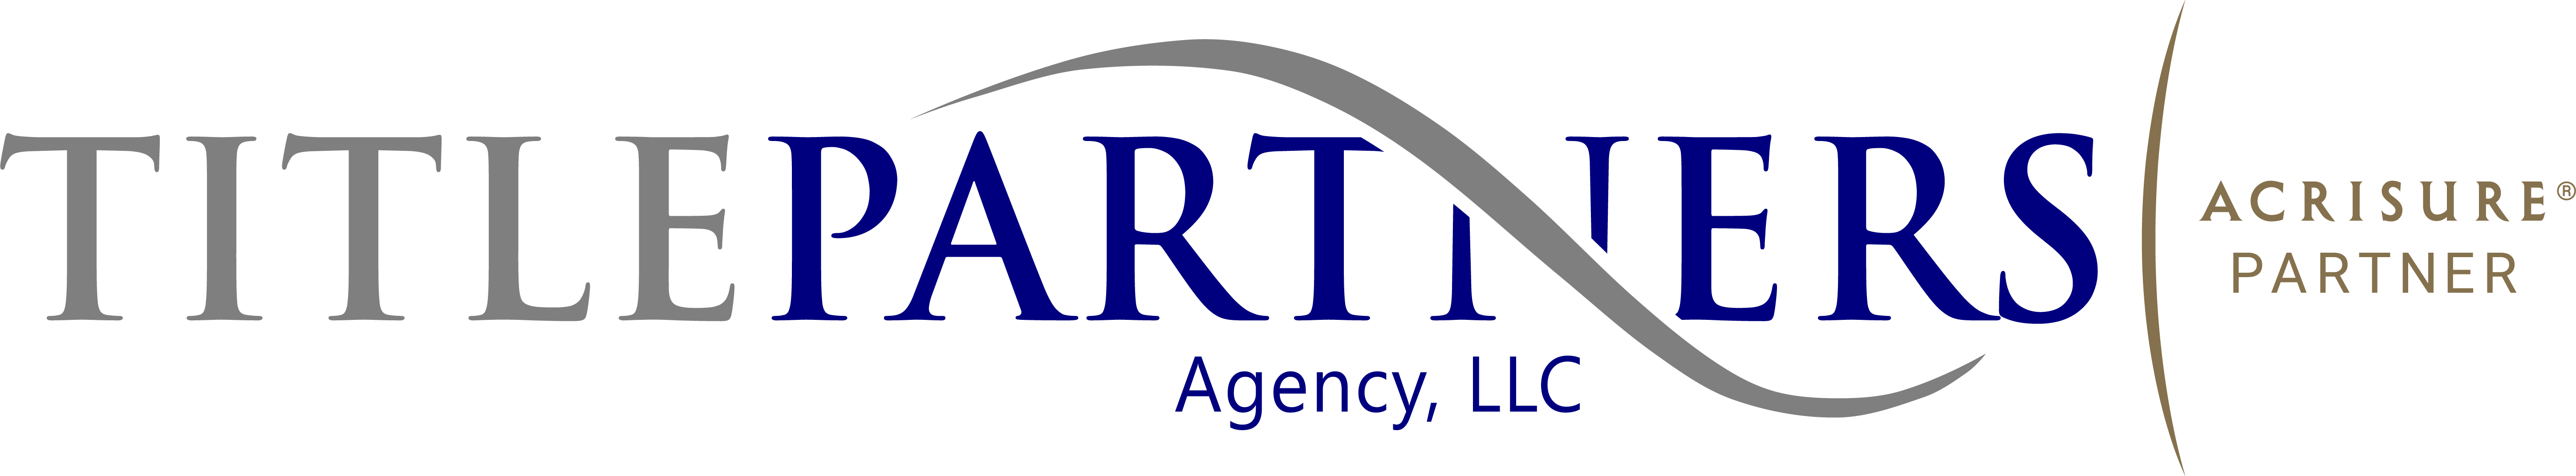 St. Louis, Chesterfield, Charles, Troy MO | Title Partners Agency